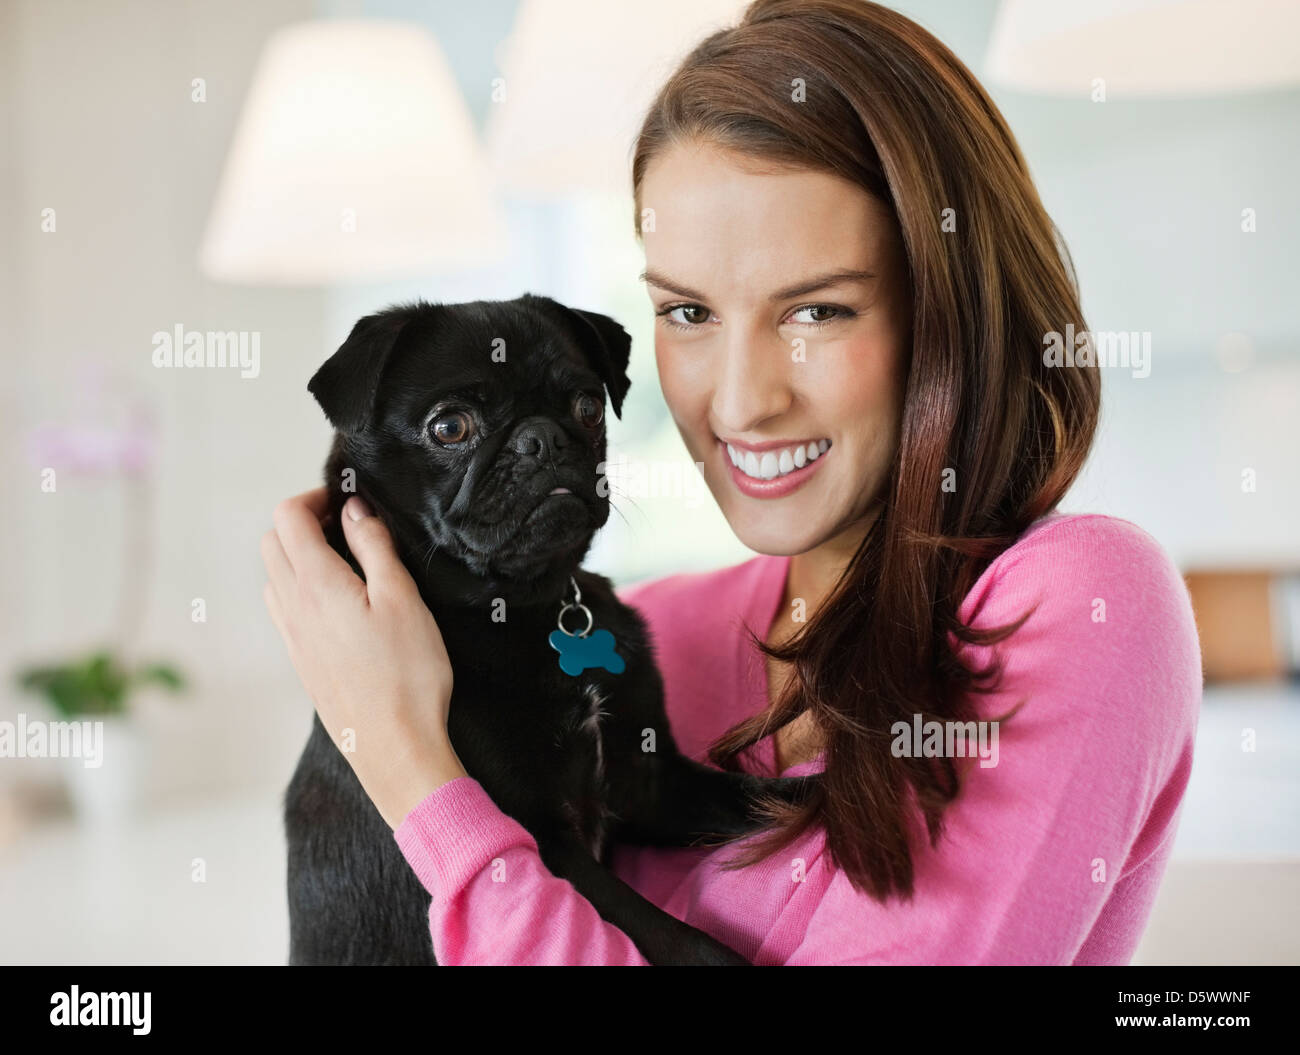 Smiling woman holding dog indoors Banque D'Images